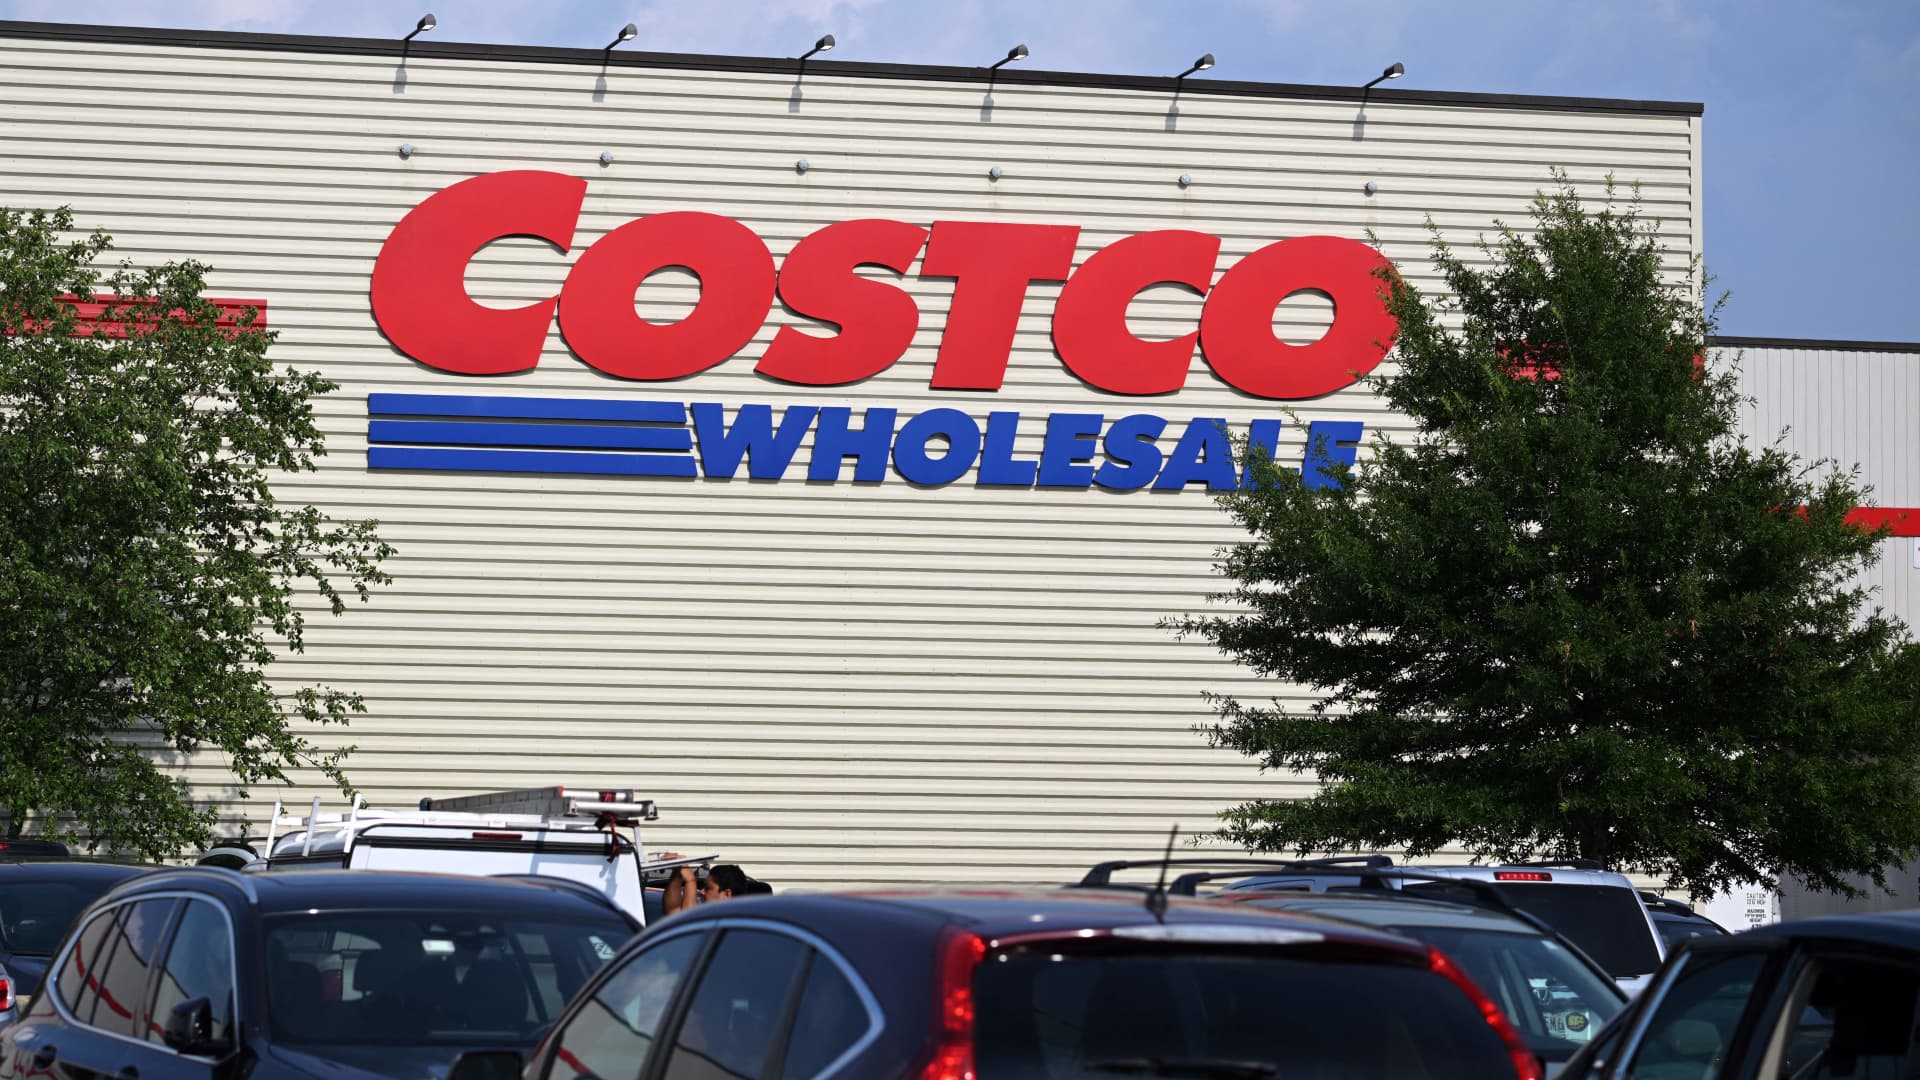 Here’s how much money you’d have if you invested $1,000 in Costco 10 years ago